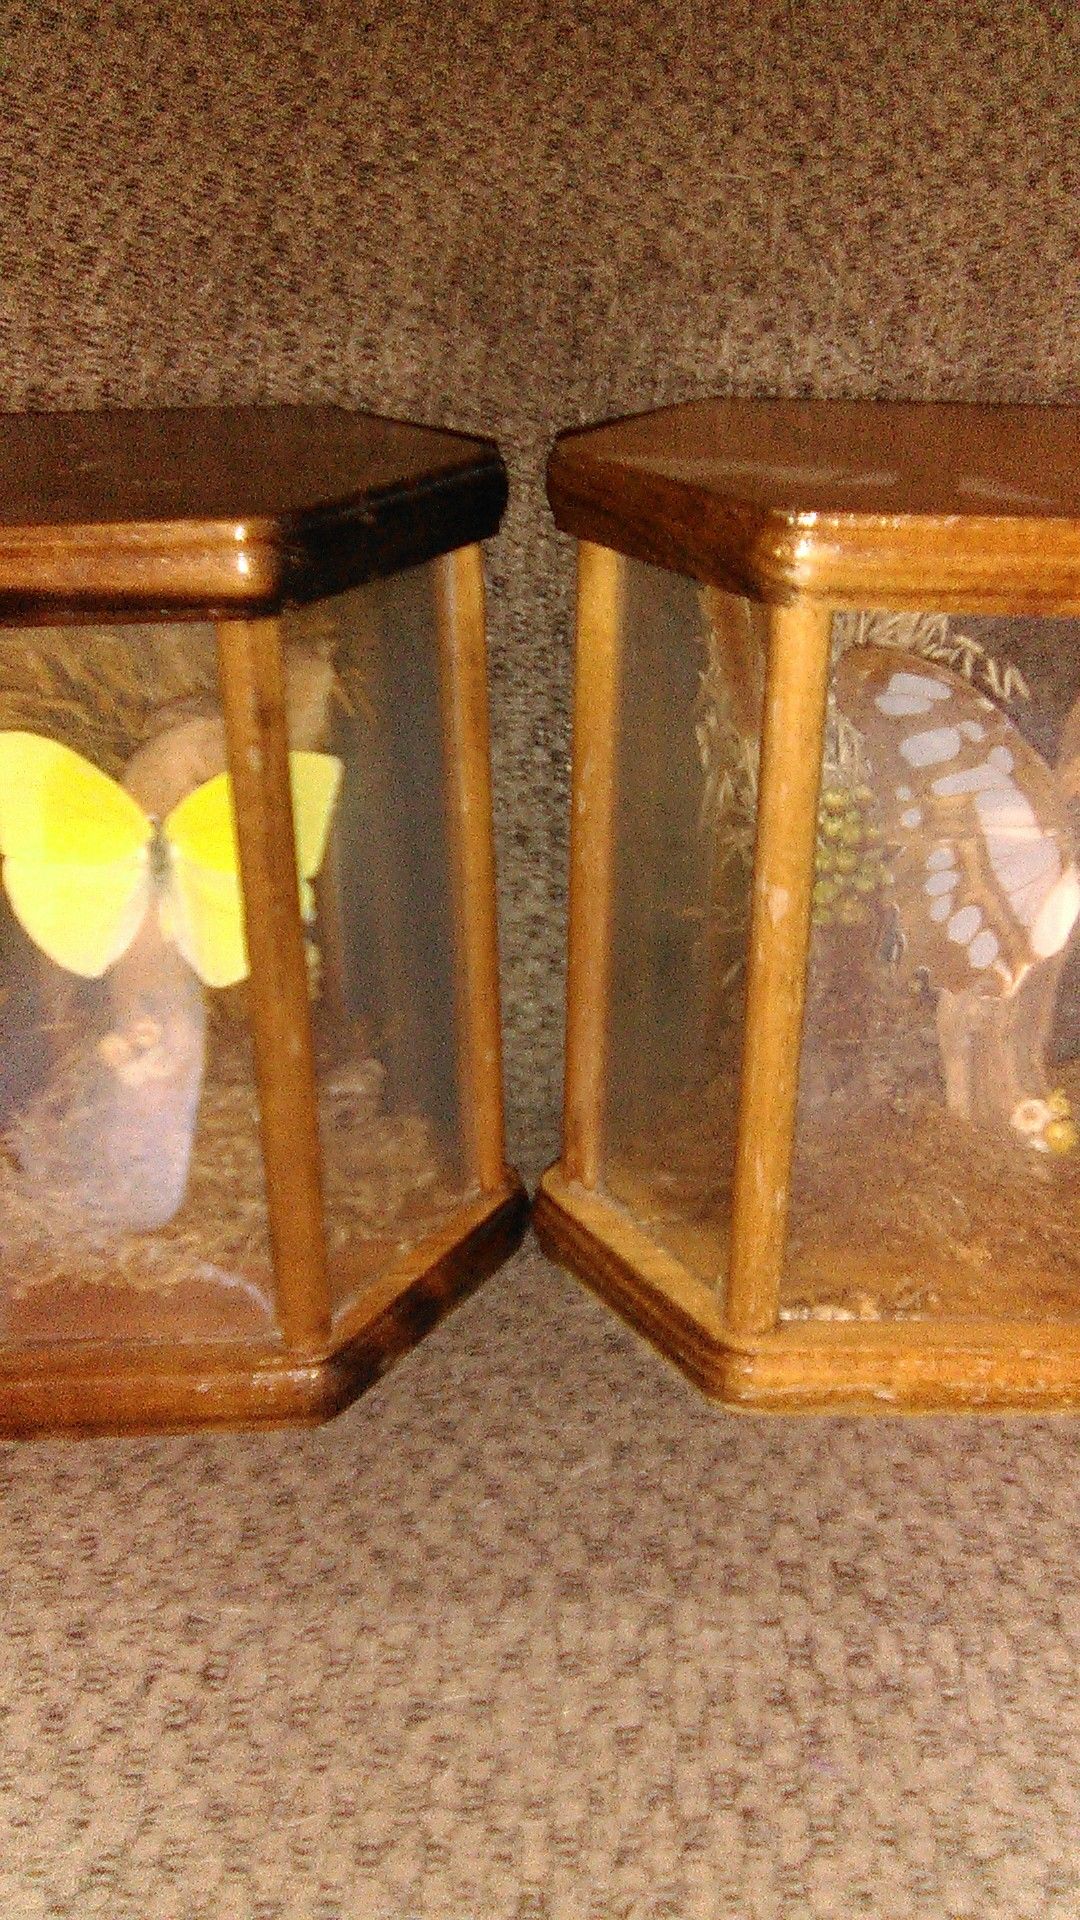 2 butterflys in display cases